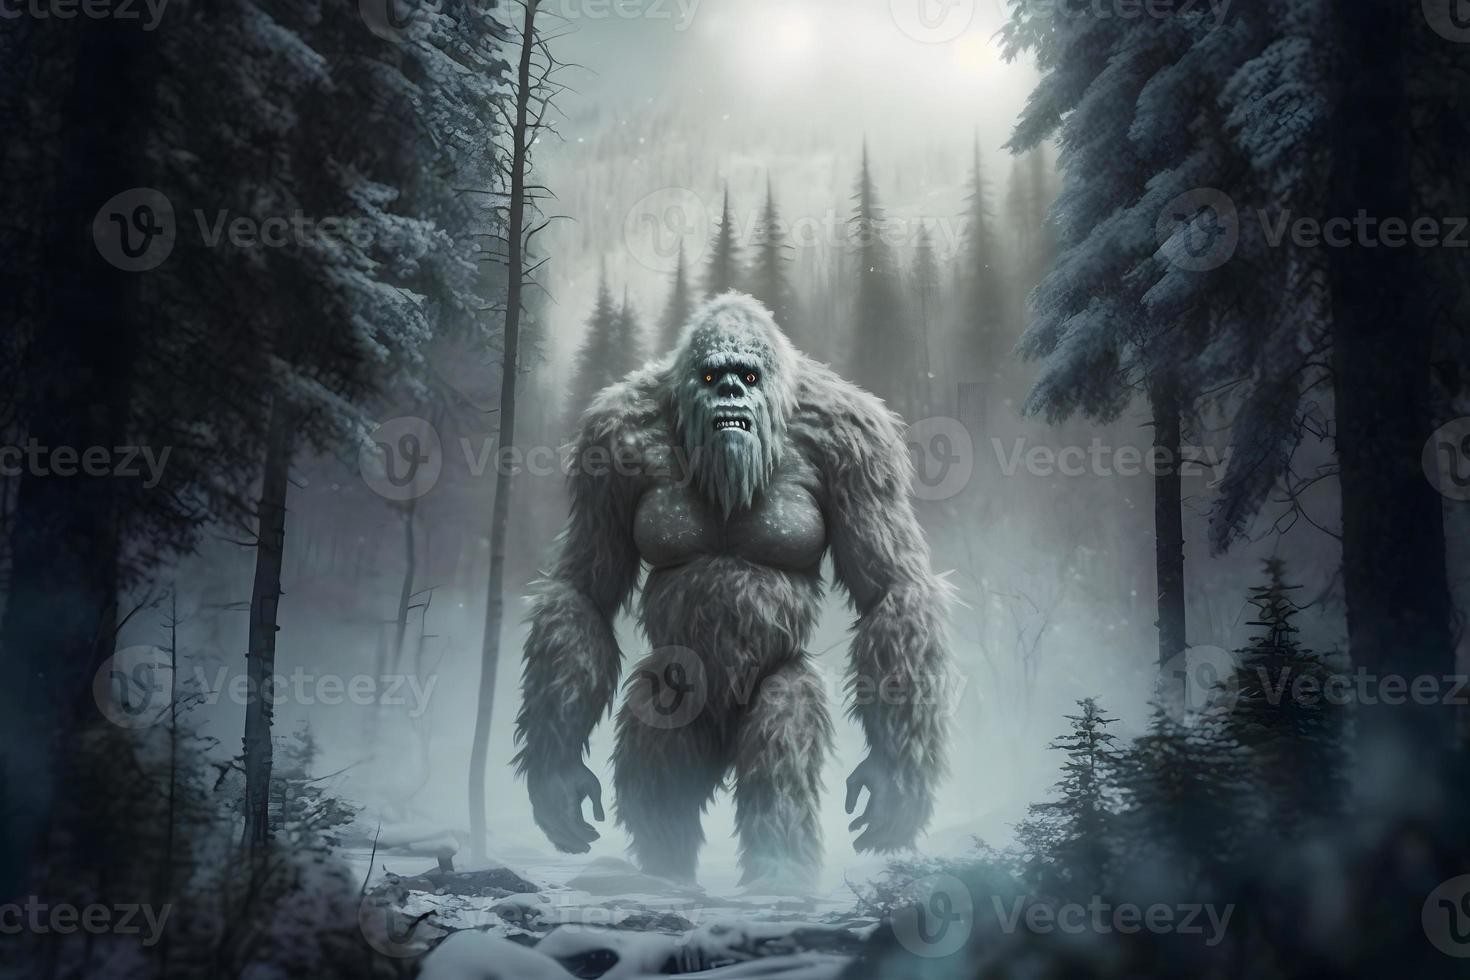 https://static.vecteezy.com/system/resources/previews/023/135/646/non_2x/yeti-or-abominable-snowman-walks-through-winter-forest-area-neural-network-generated-art-photo.jpg